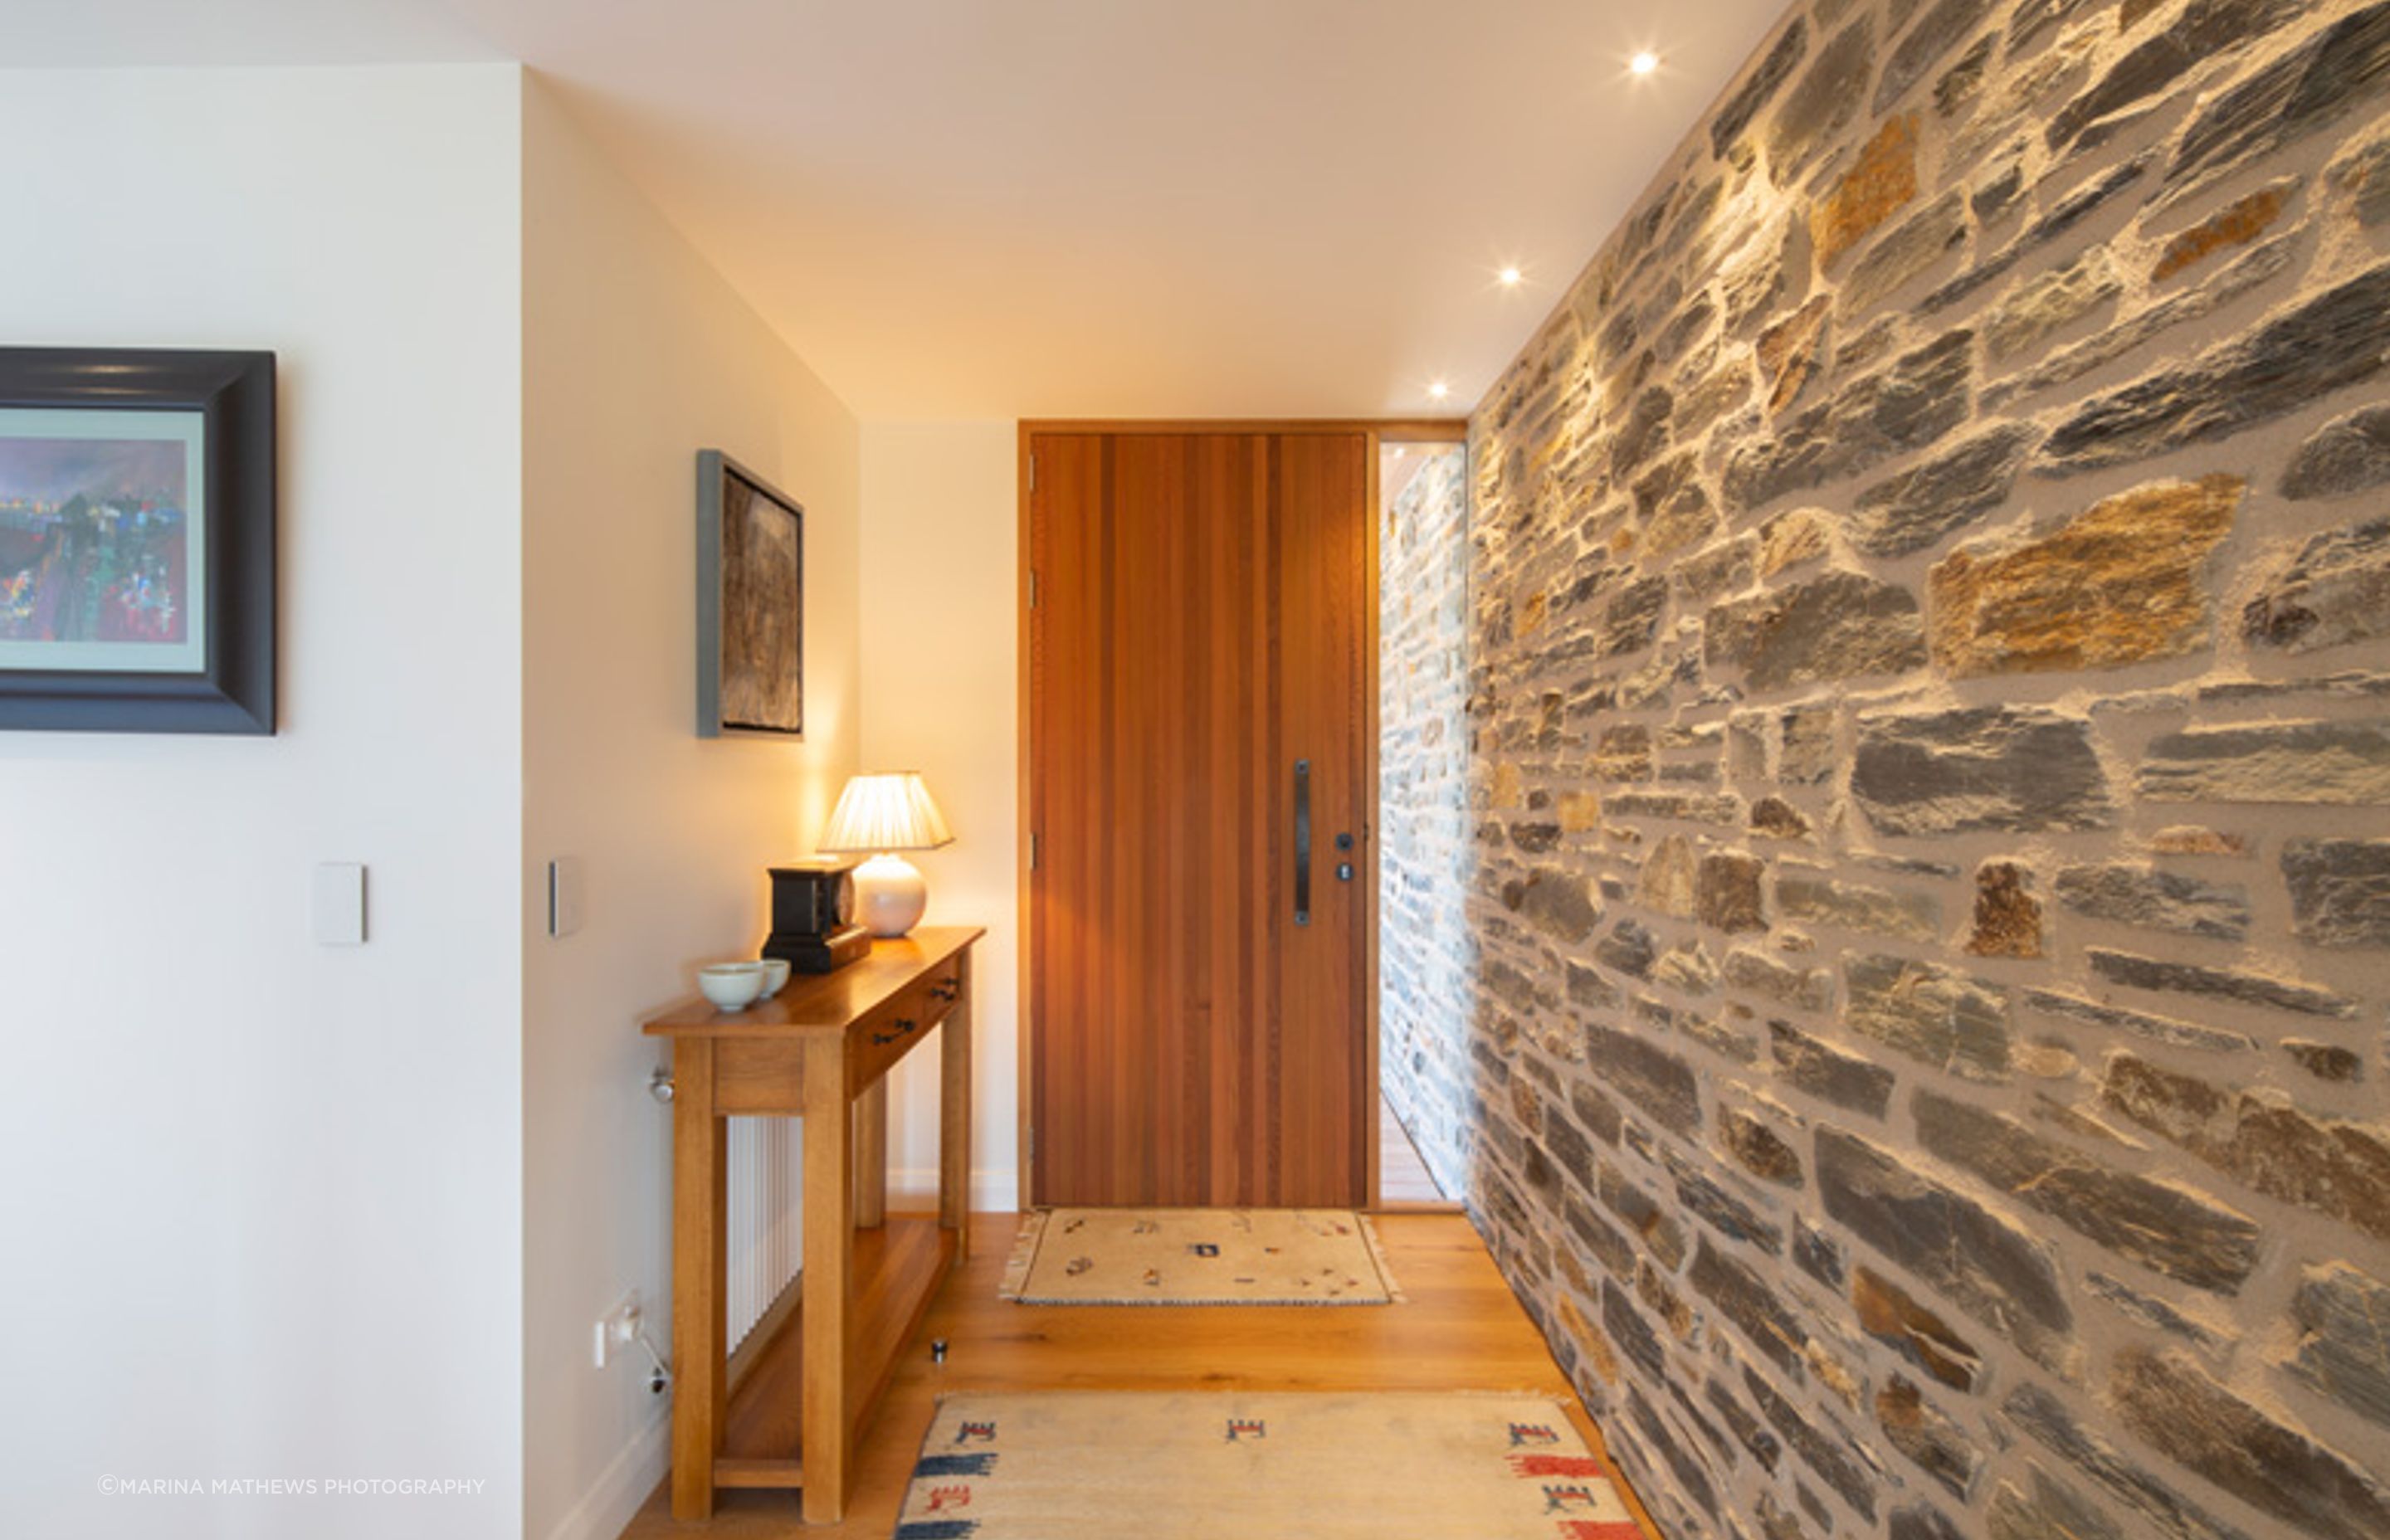 The bagged stone cladding has been continued inside to create an impressive feature wall in the entryway.